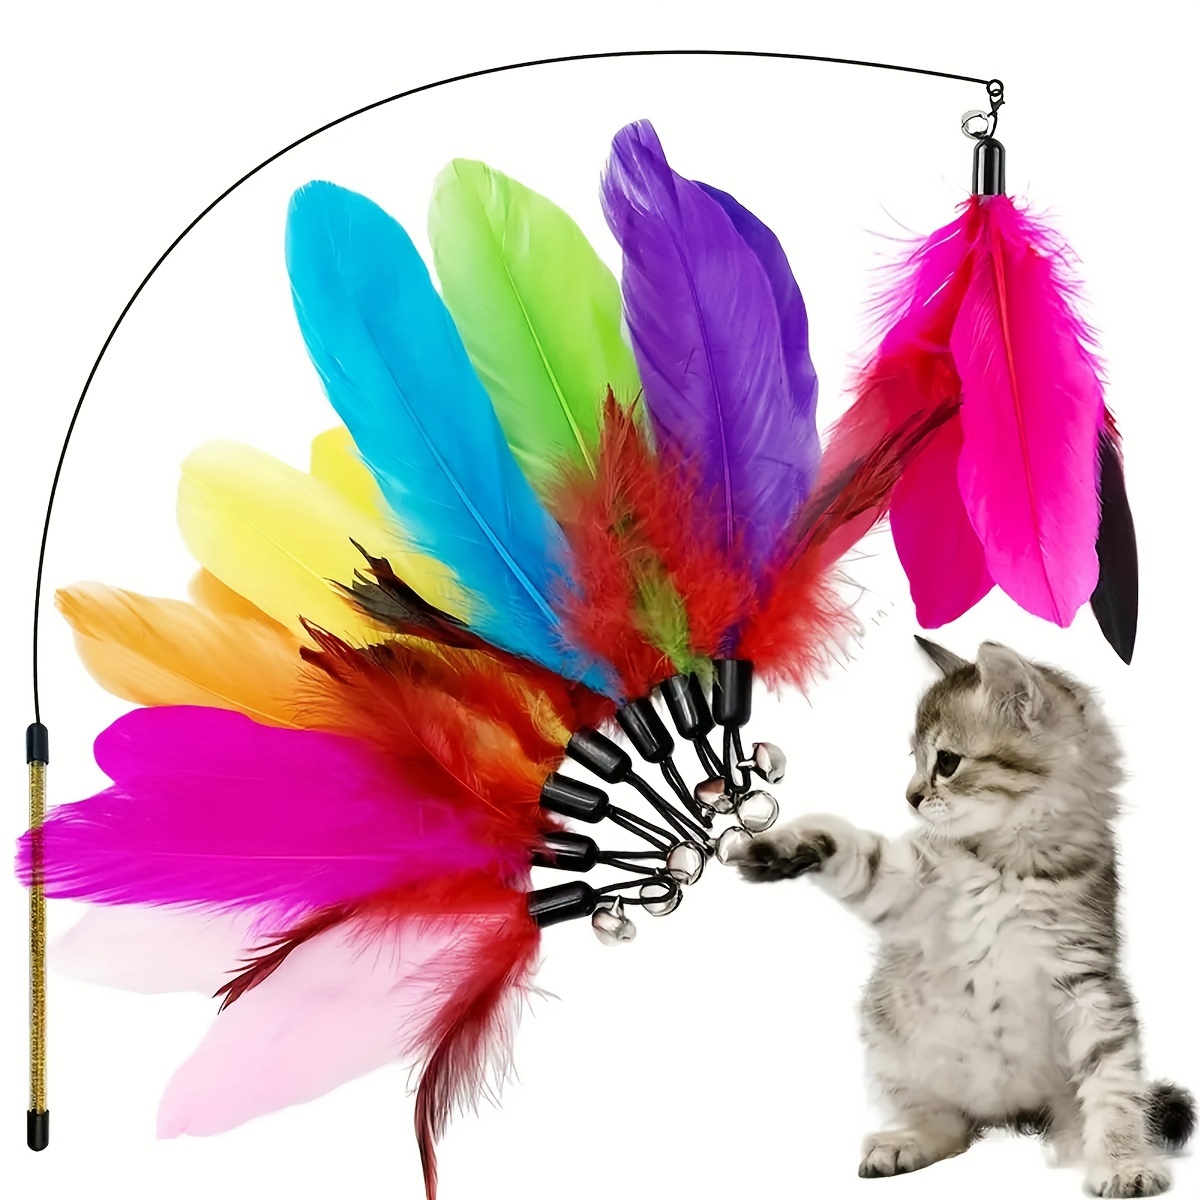  Cat Toys Feathers Wand, Interactive Cat Toy Kitten Toys 2  Retractable Cat Wand Toy and 7 Feather Teaser Refills with bells,  Telescopic Cat Fishing Pole Toy for Indoor Bored Cats